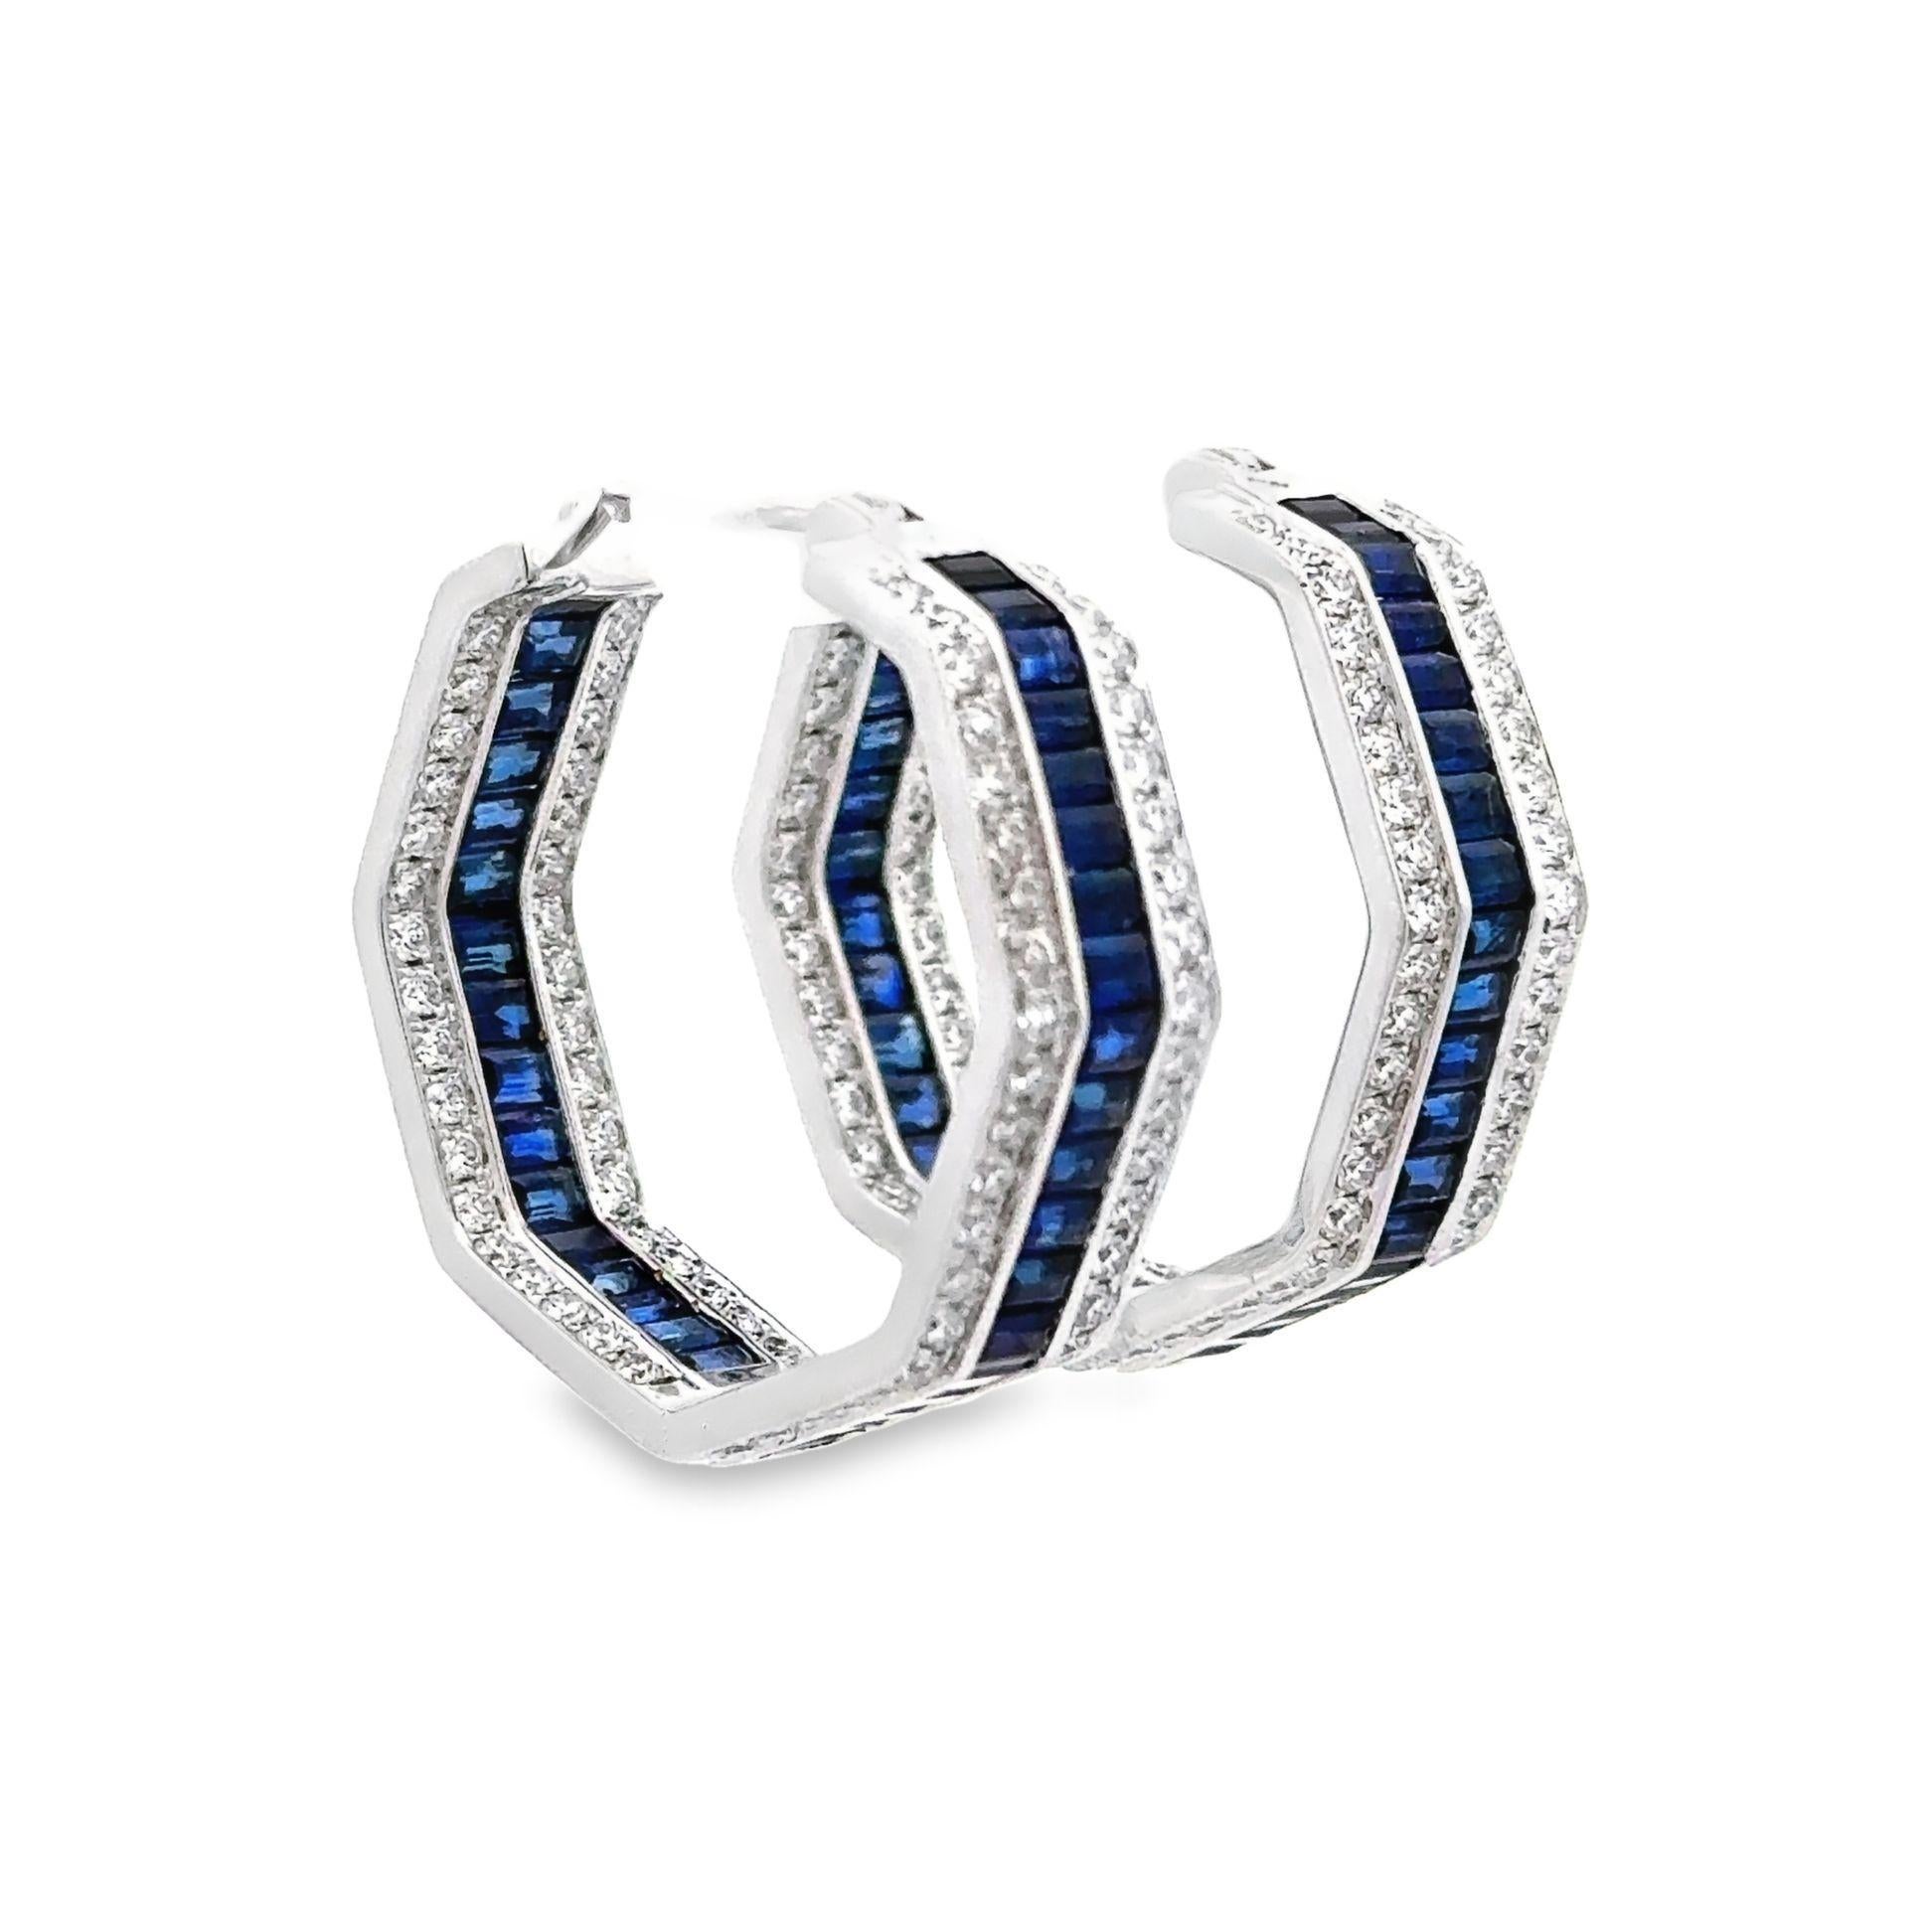 Made in 18kt white gold, these stunning medium hoops are suitable for a glamorous outfit or casual wearing. Surrounding the 7.47 carats of beautiful rich blue baguette-cut sapphires are a perfect pave-set of 2.20 carats round brilliant-cut diamonds.